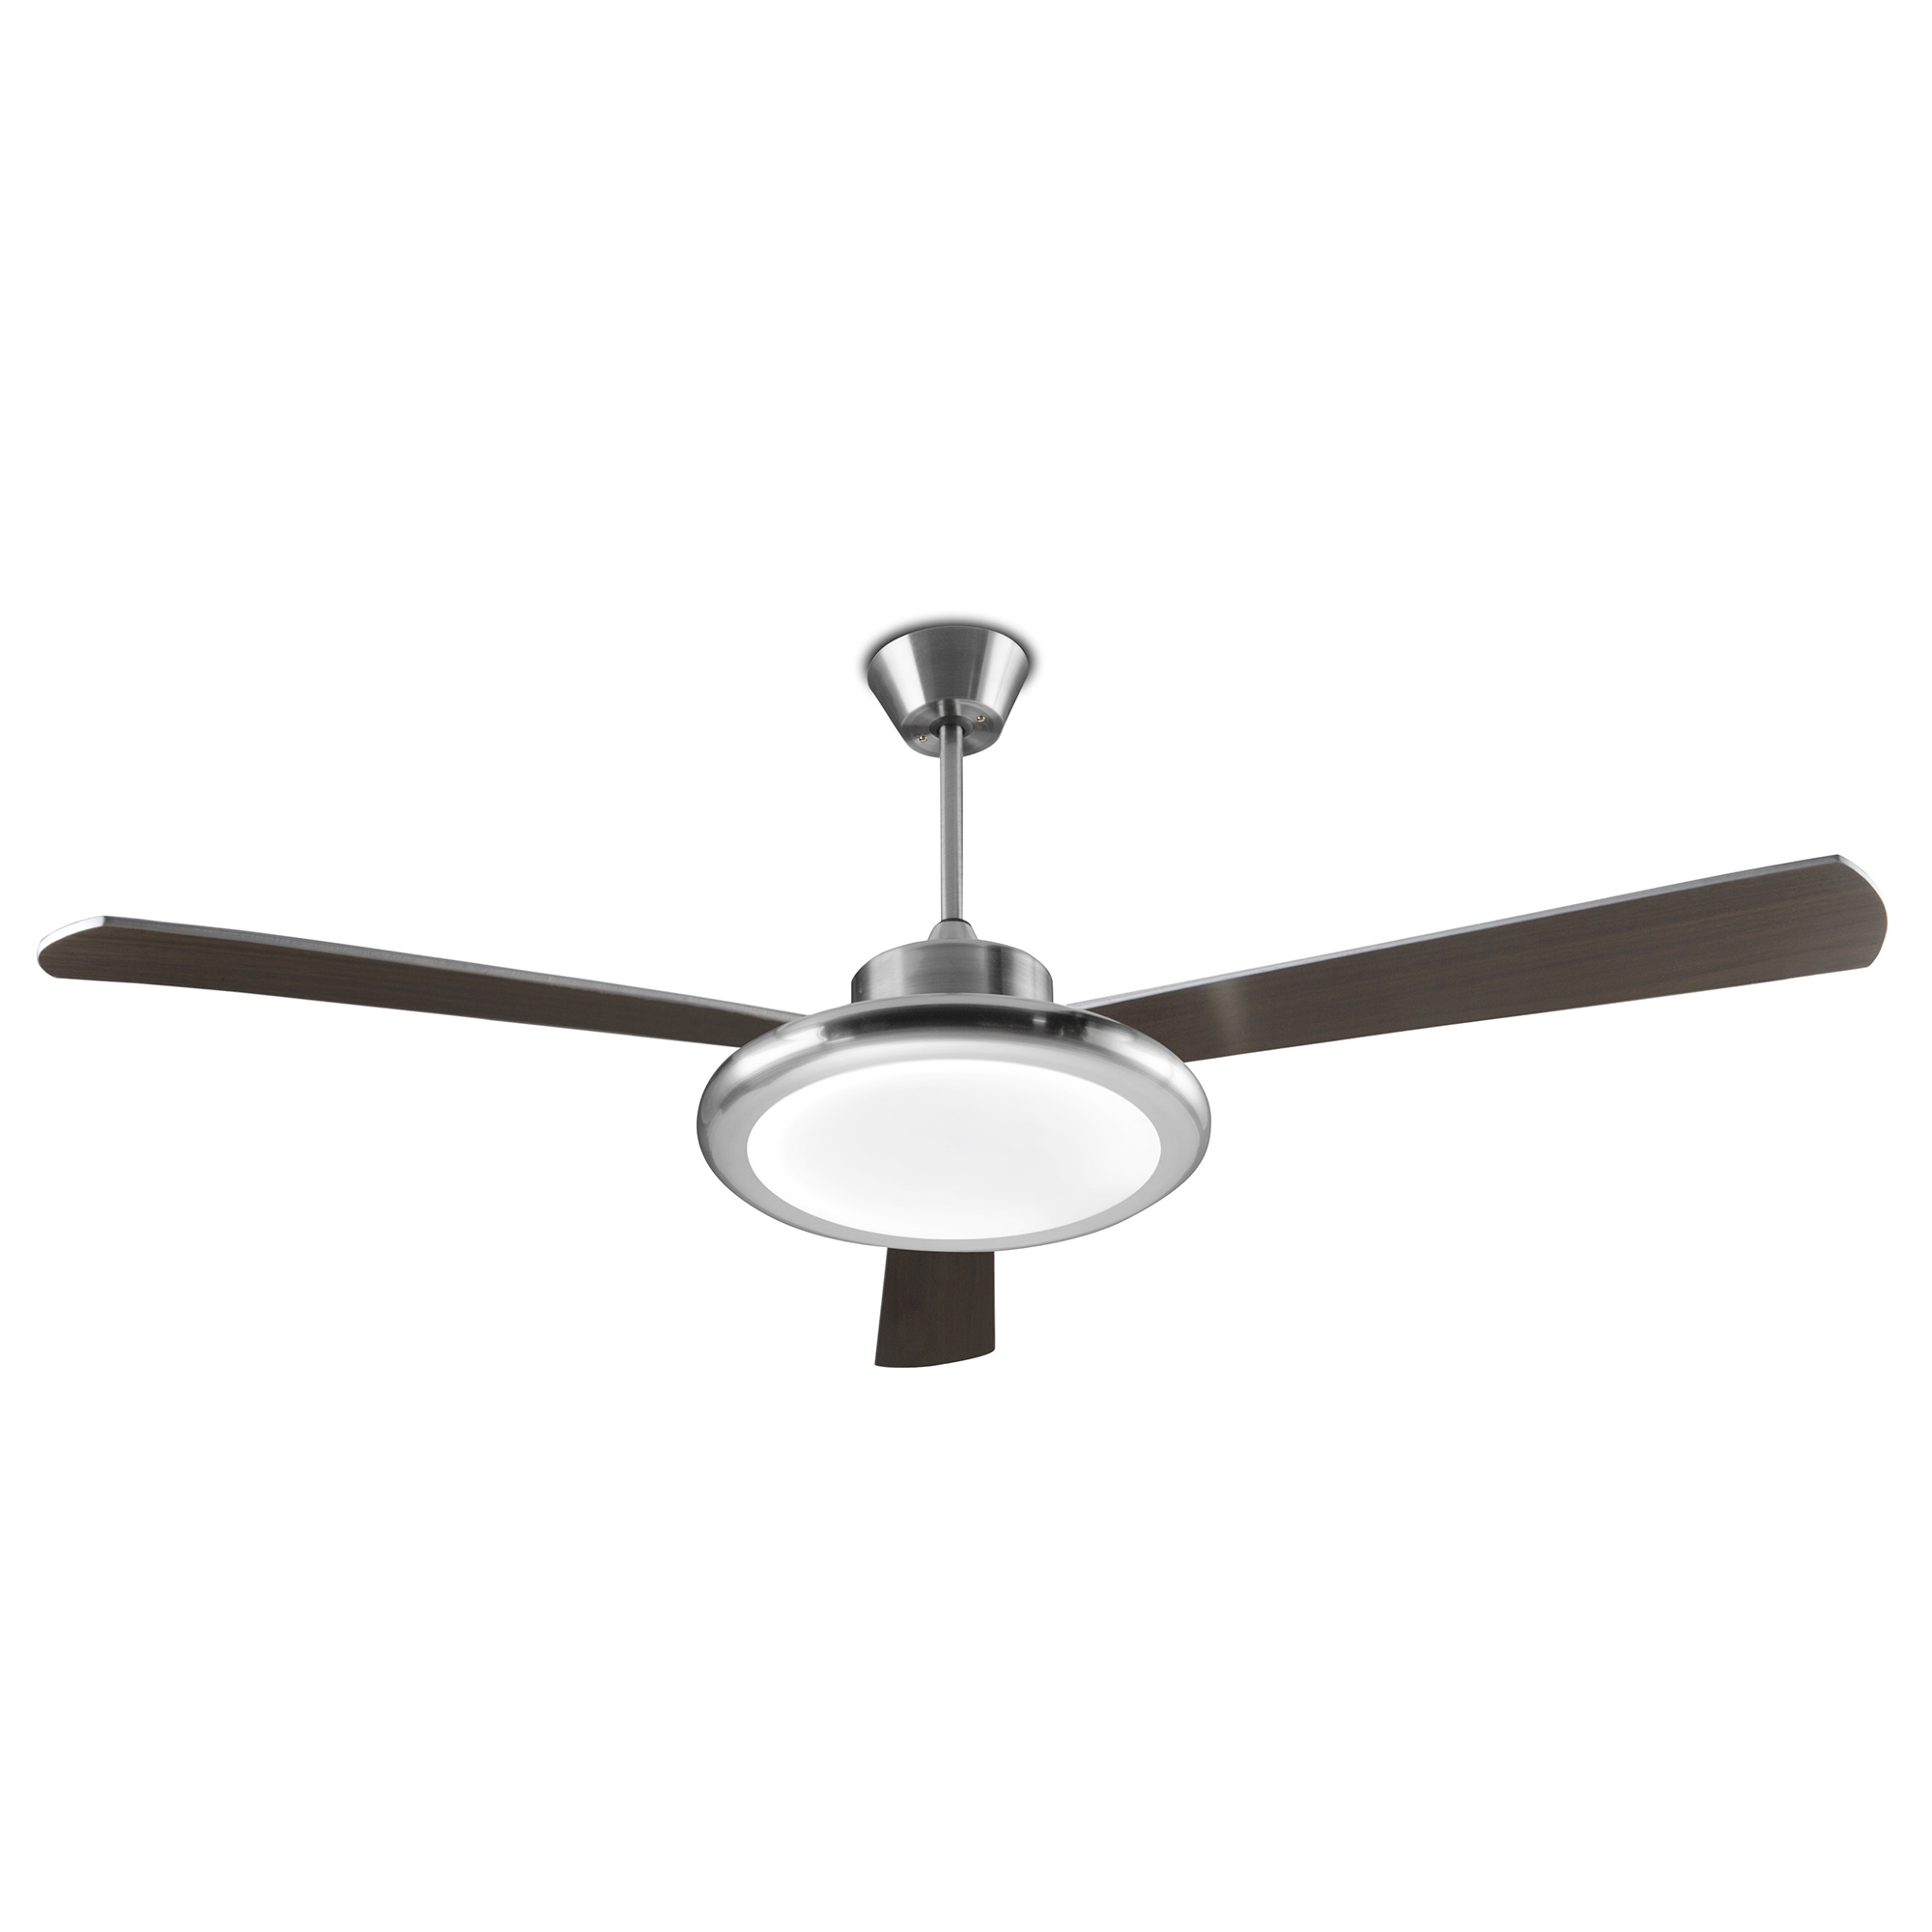 Arlec Ceiling Fan With Light And Remote Control